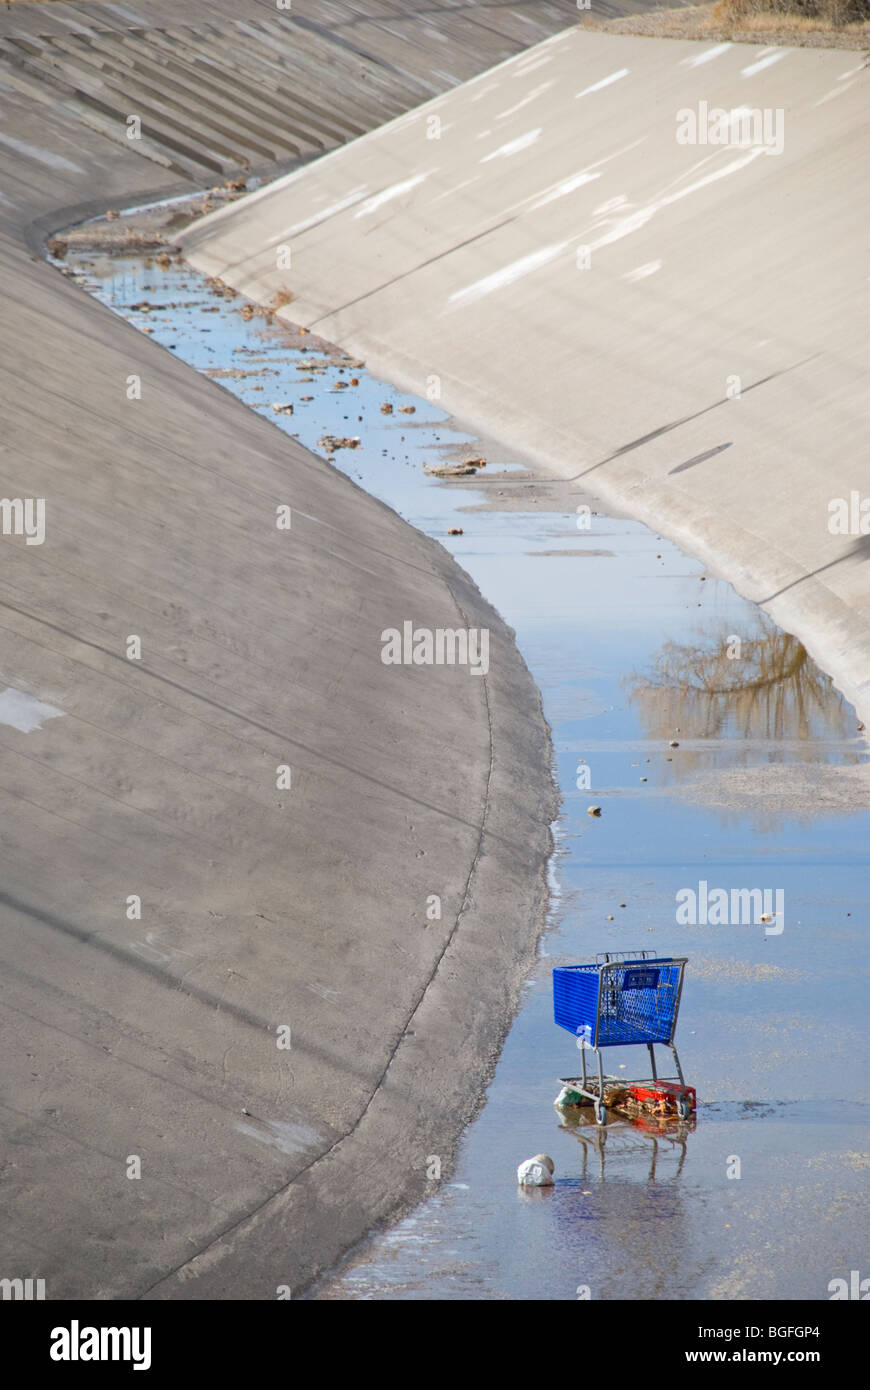 A grocery cart finds itself a new home among floating debris in the middle of an arroyo in Albuquerque, New Mexico. Stock Photo